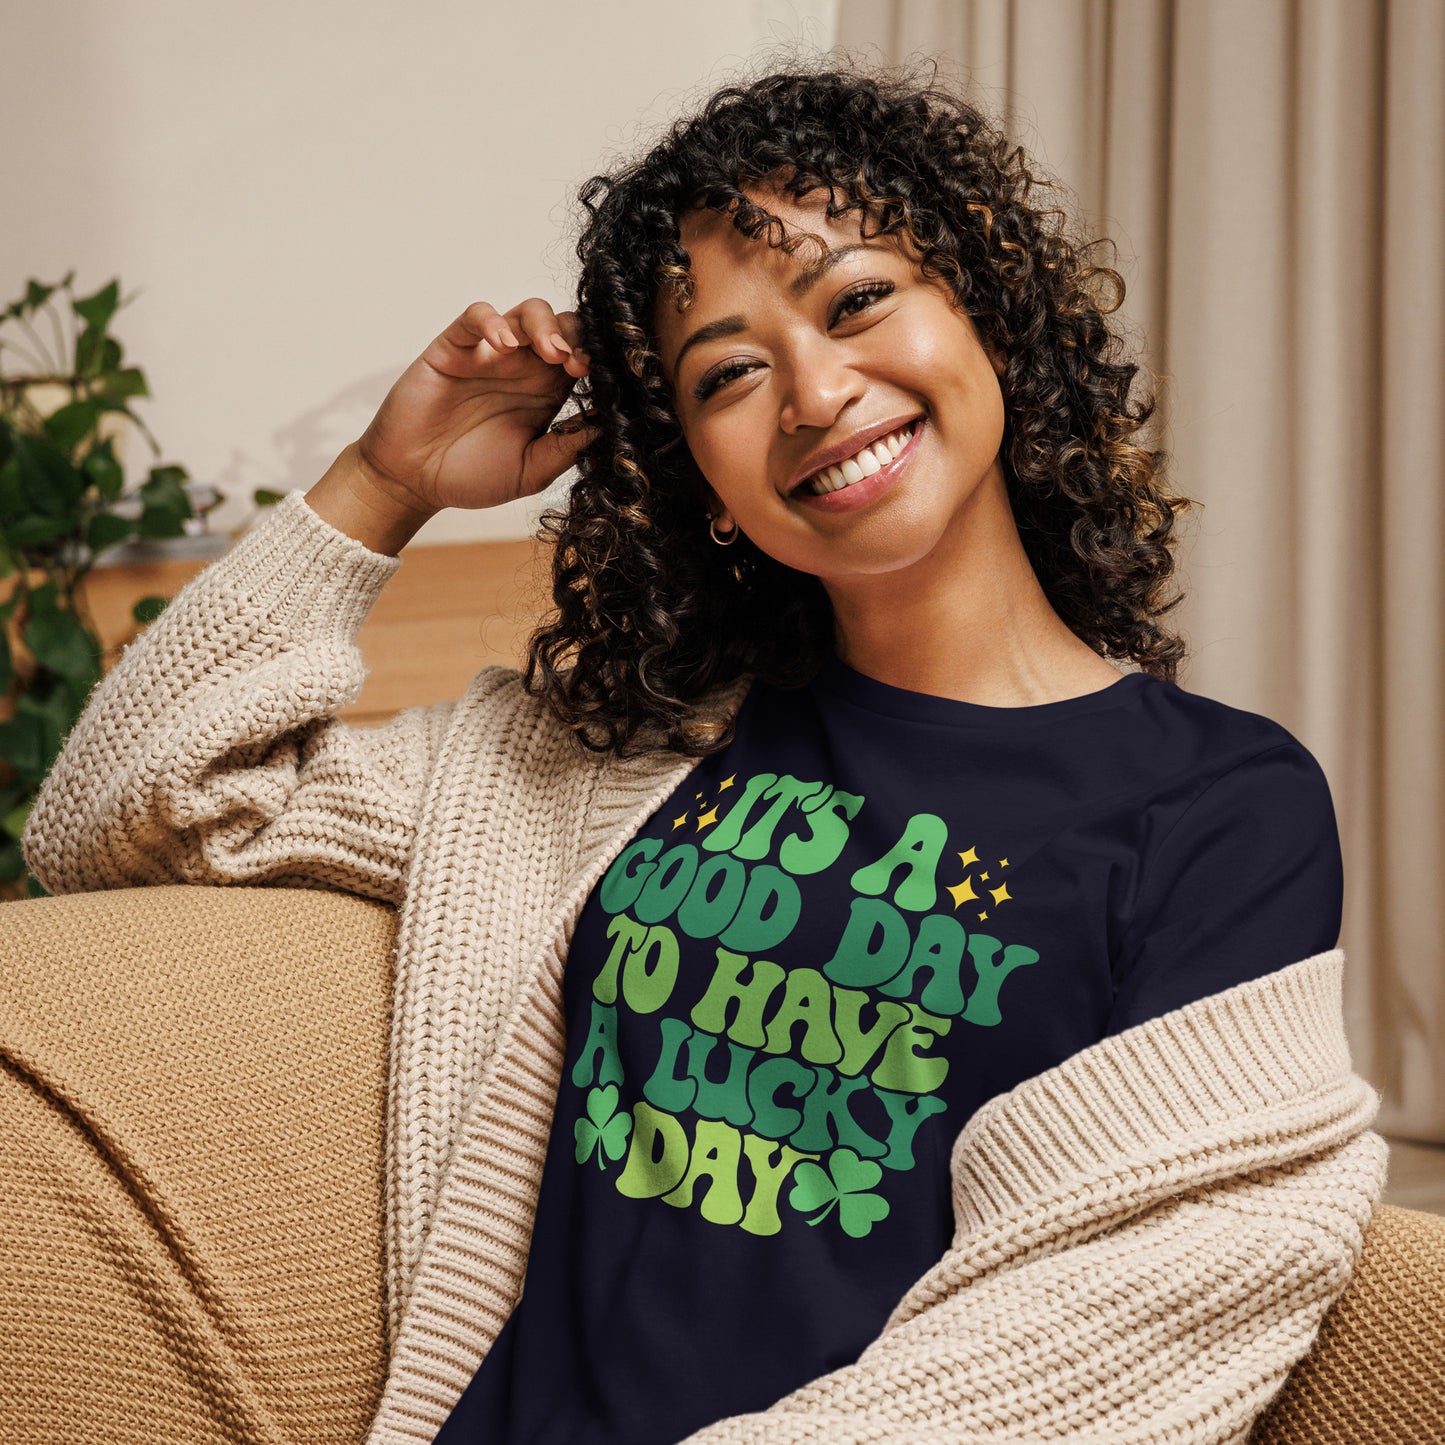 Women's Relaxed T-Shirt - St Patty's Day It's A Good Day to Have a Good Day